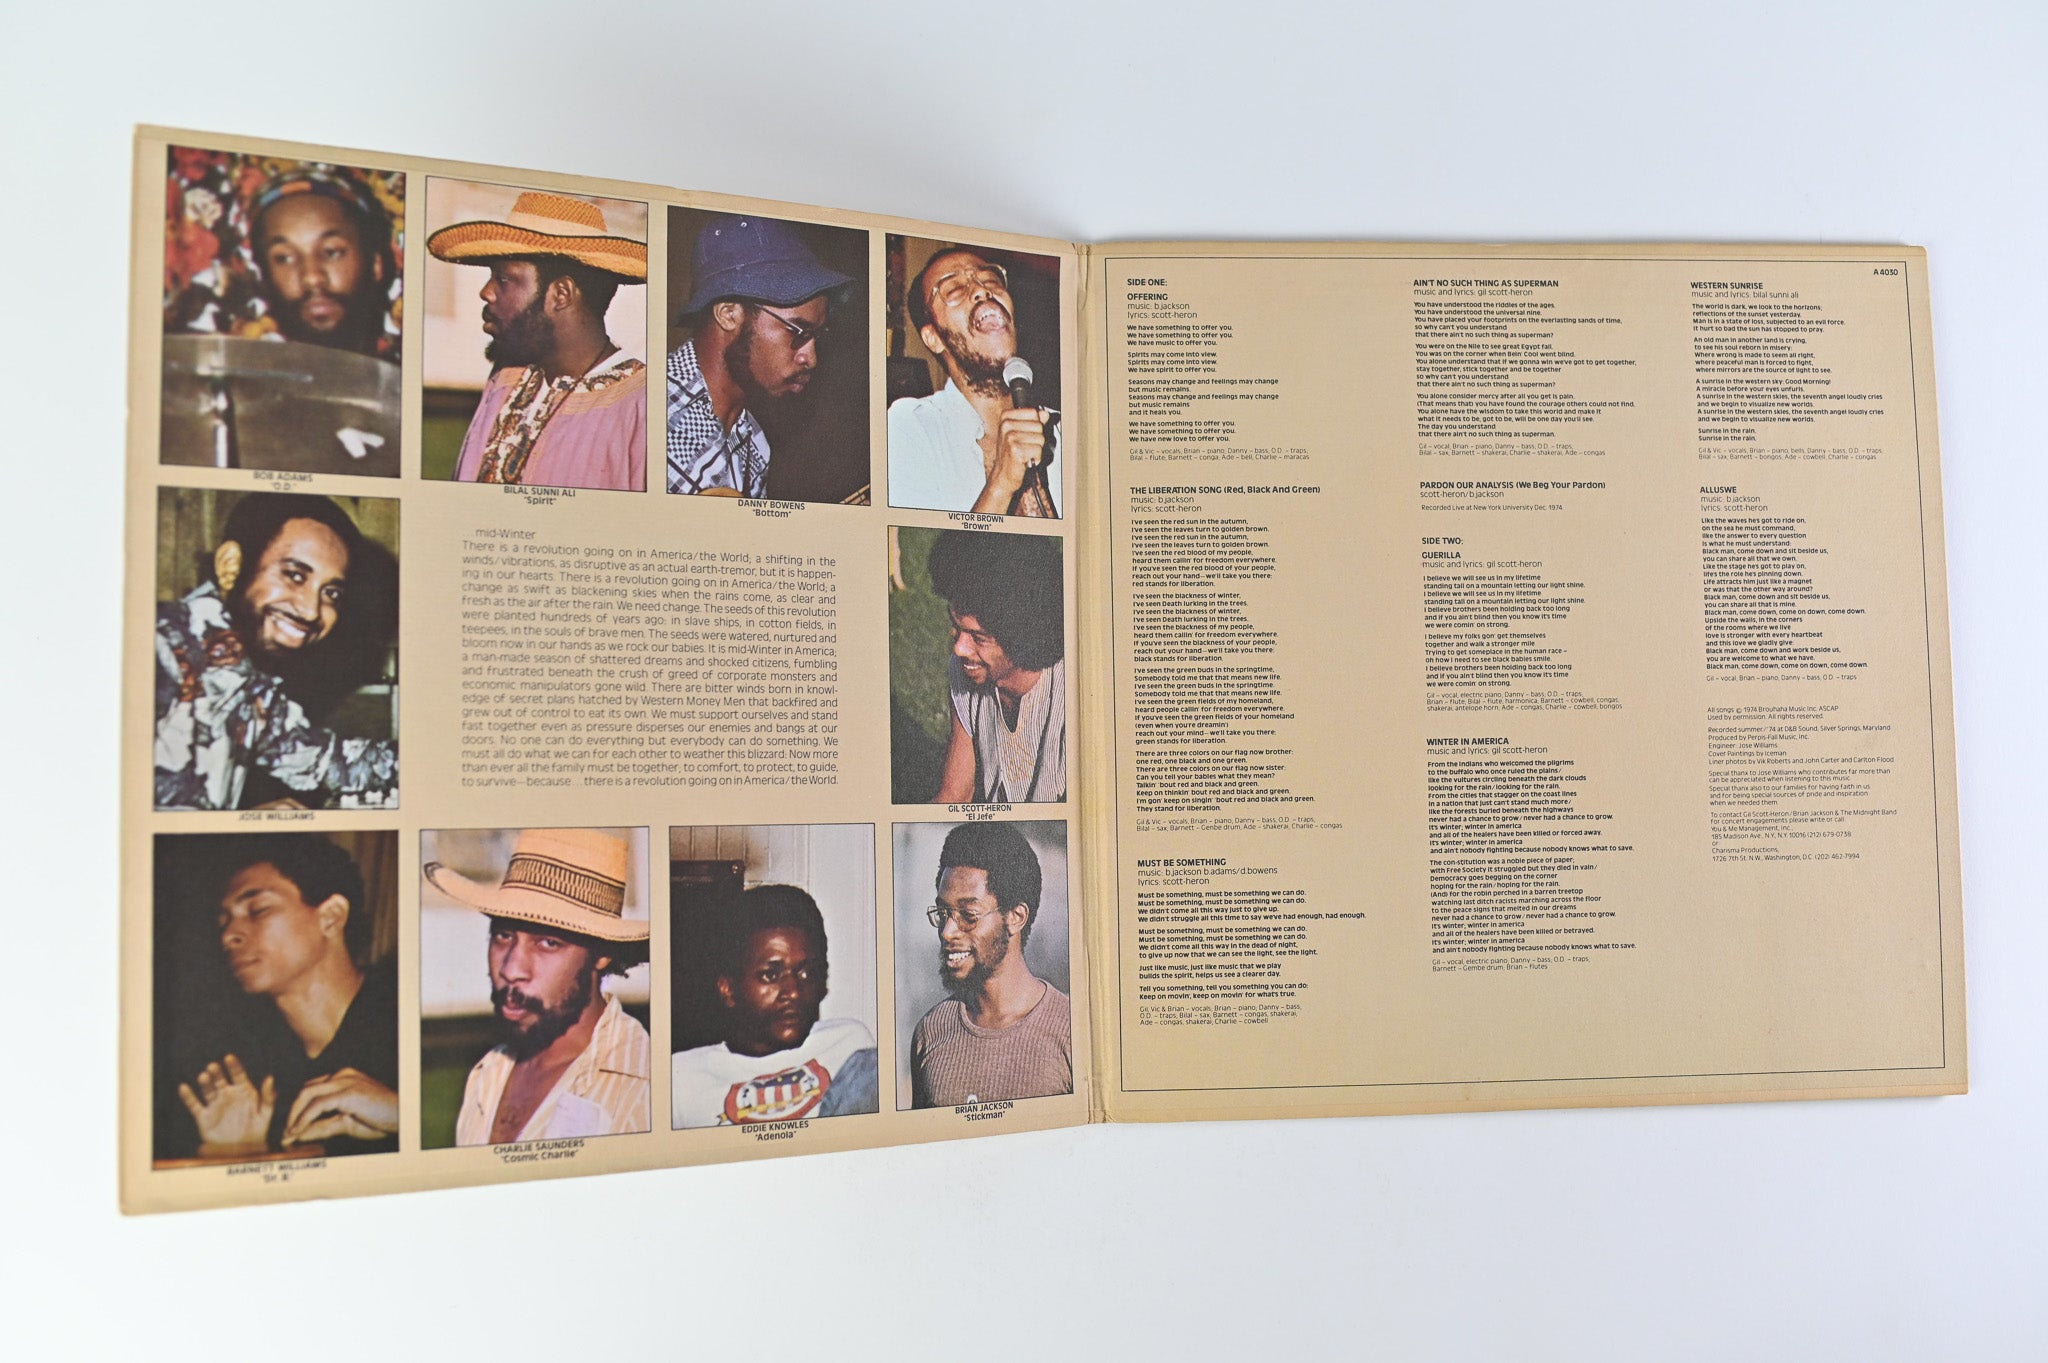 Gil Scott-Heron & Brian Jackson - The First Minute Of A New Day on Arista Promo With Publicity Photos